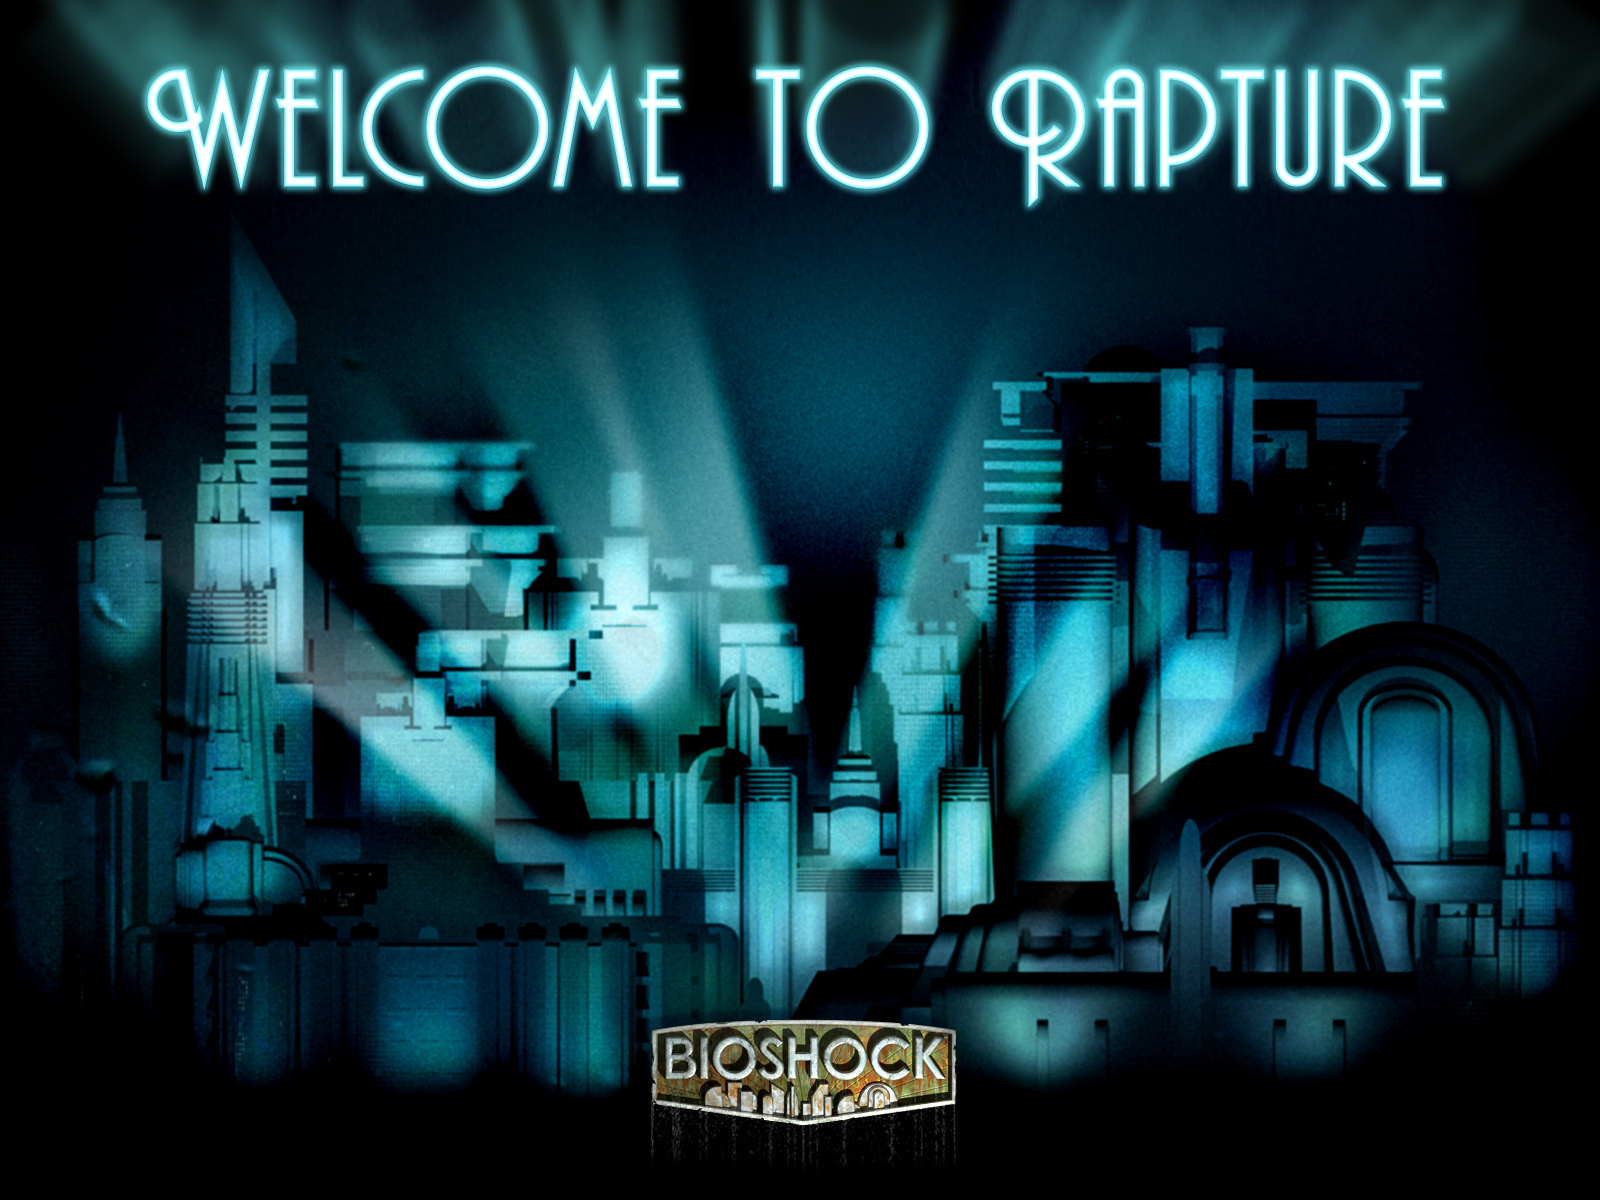 Bioshock Image HD Wallpaper And Background